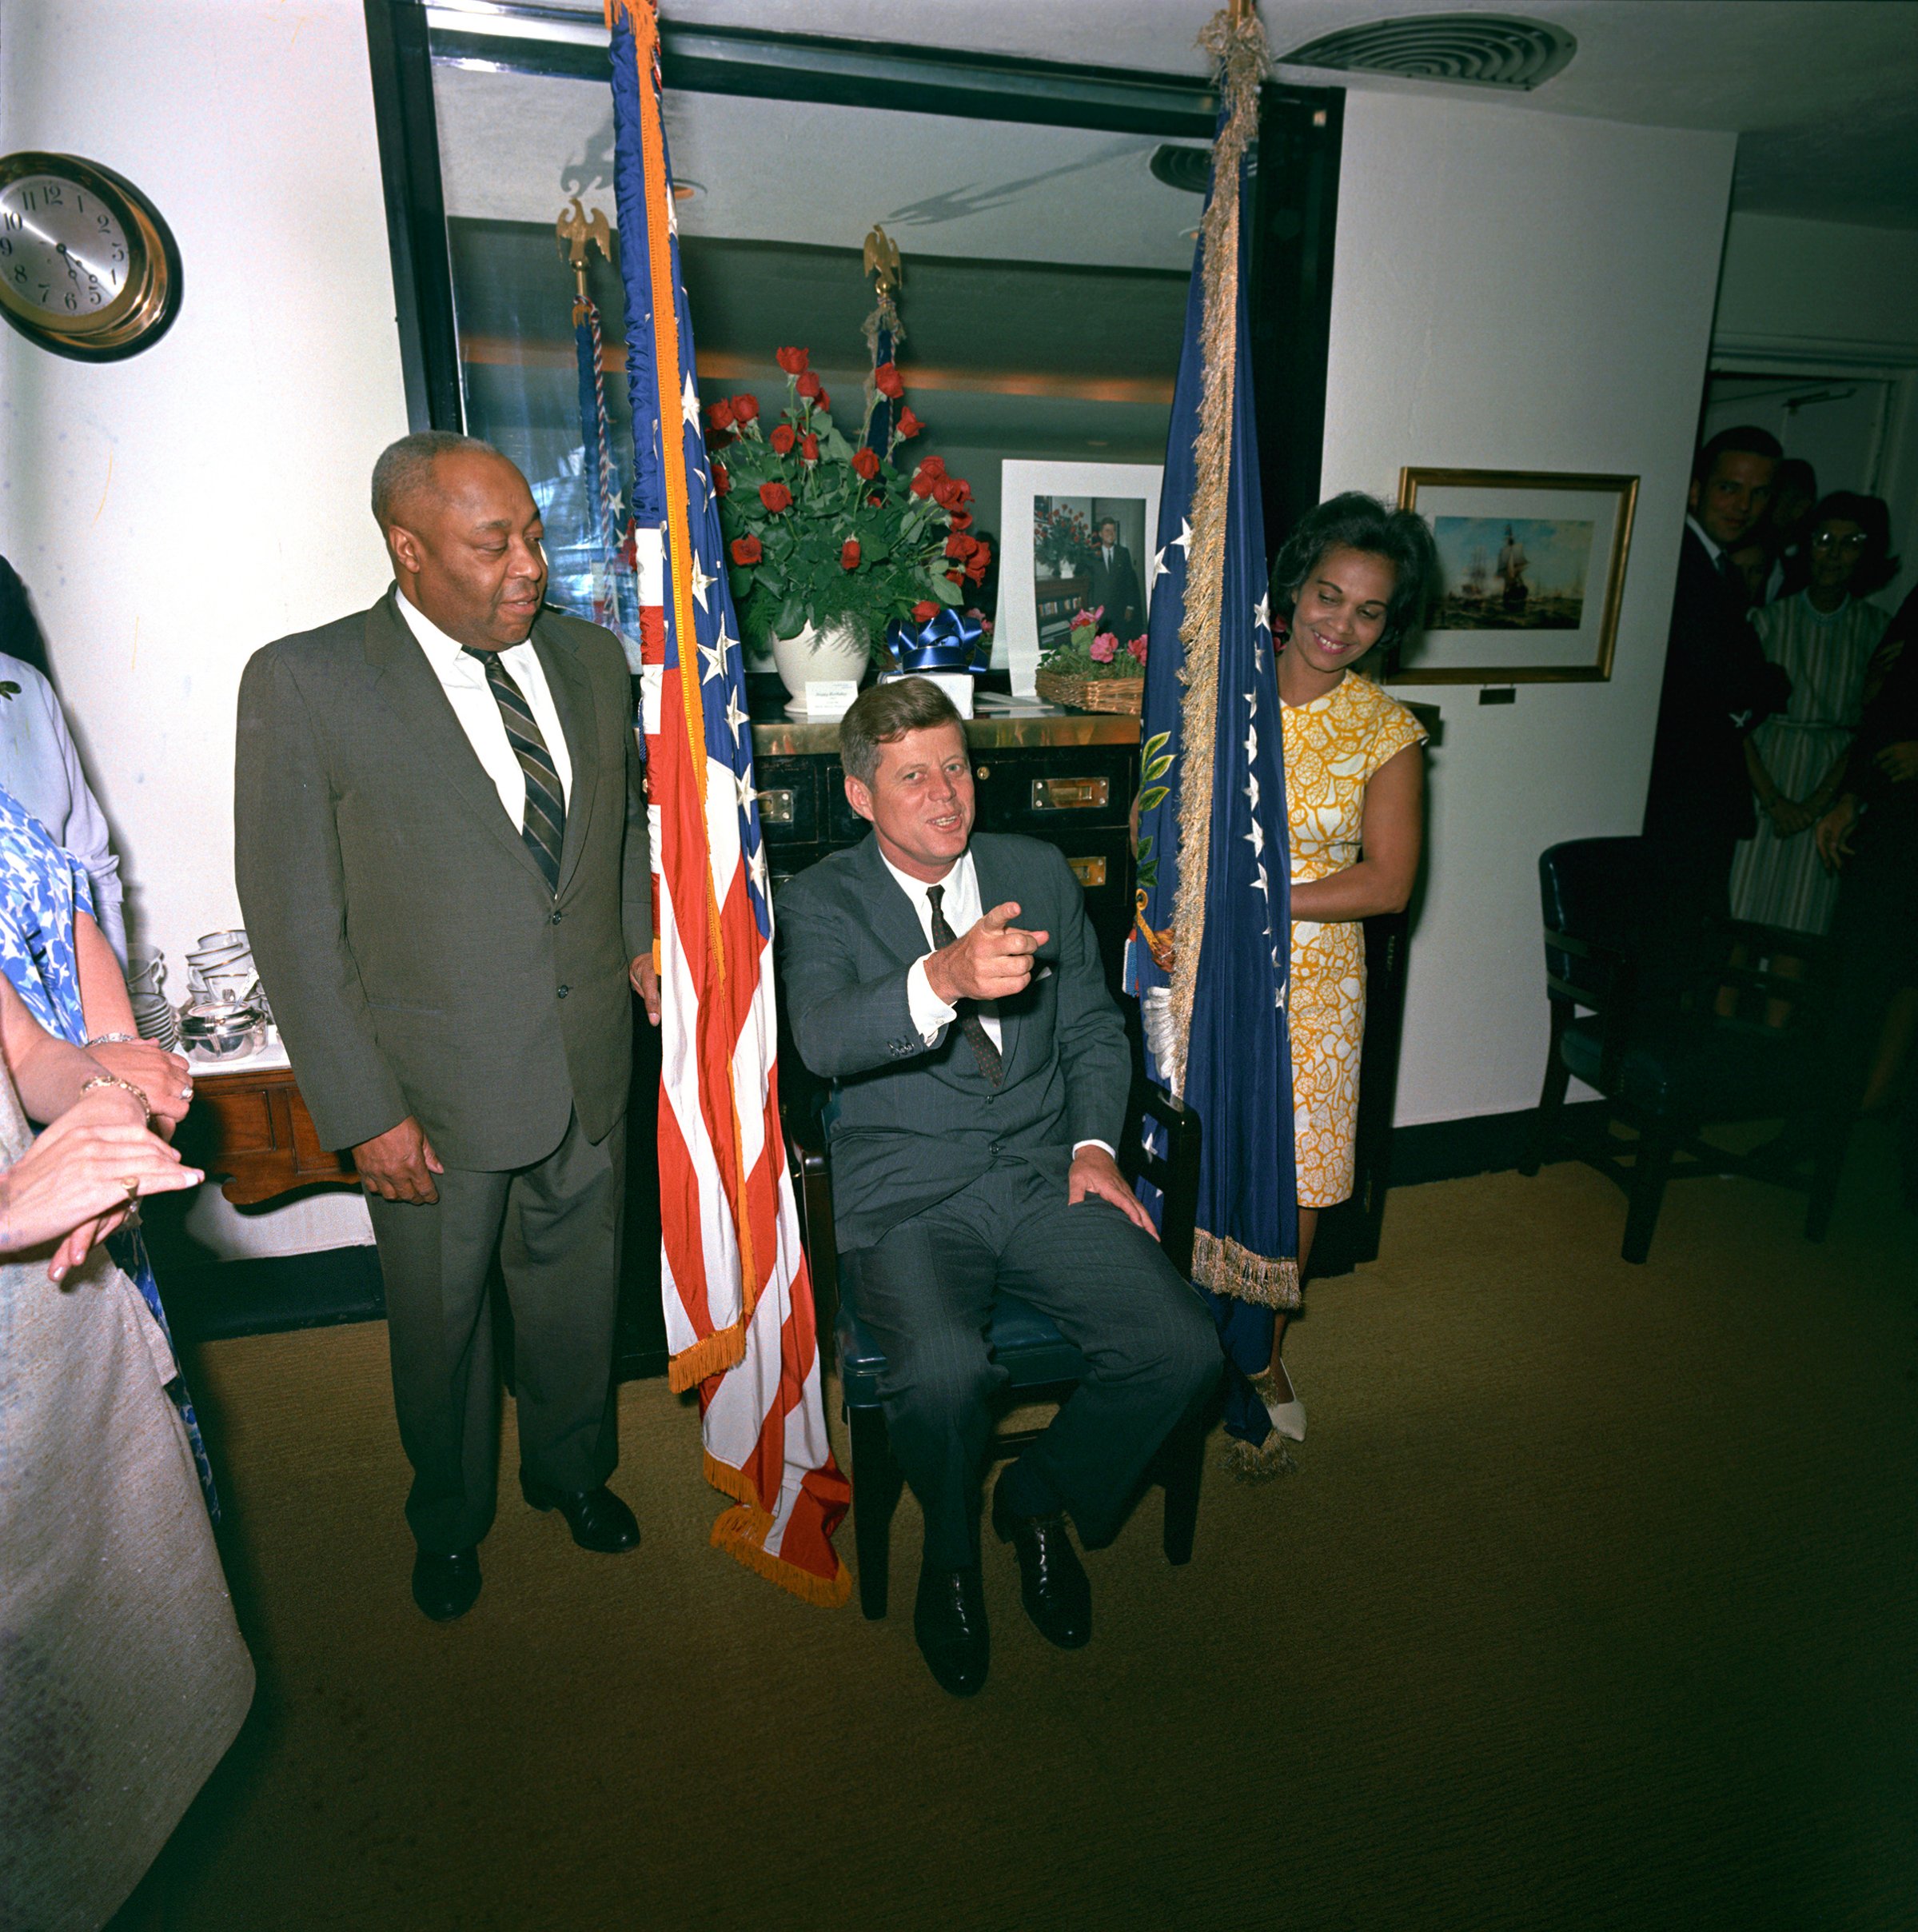 George E. Thomas, President John F. Kennedy's valet, attends a surprise birthday held for President Kennedy in Washington, D.C. on May 29, 1963.